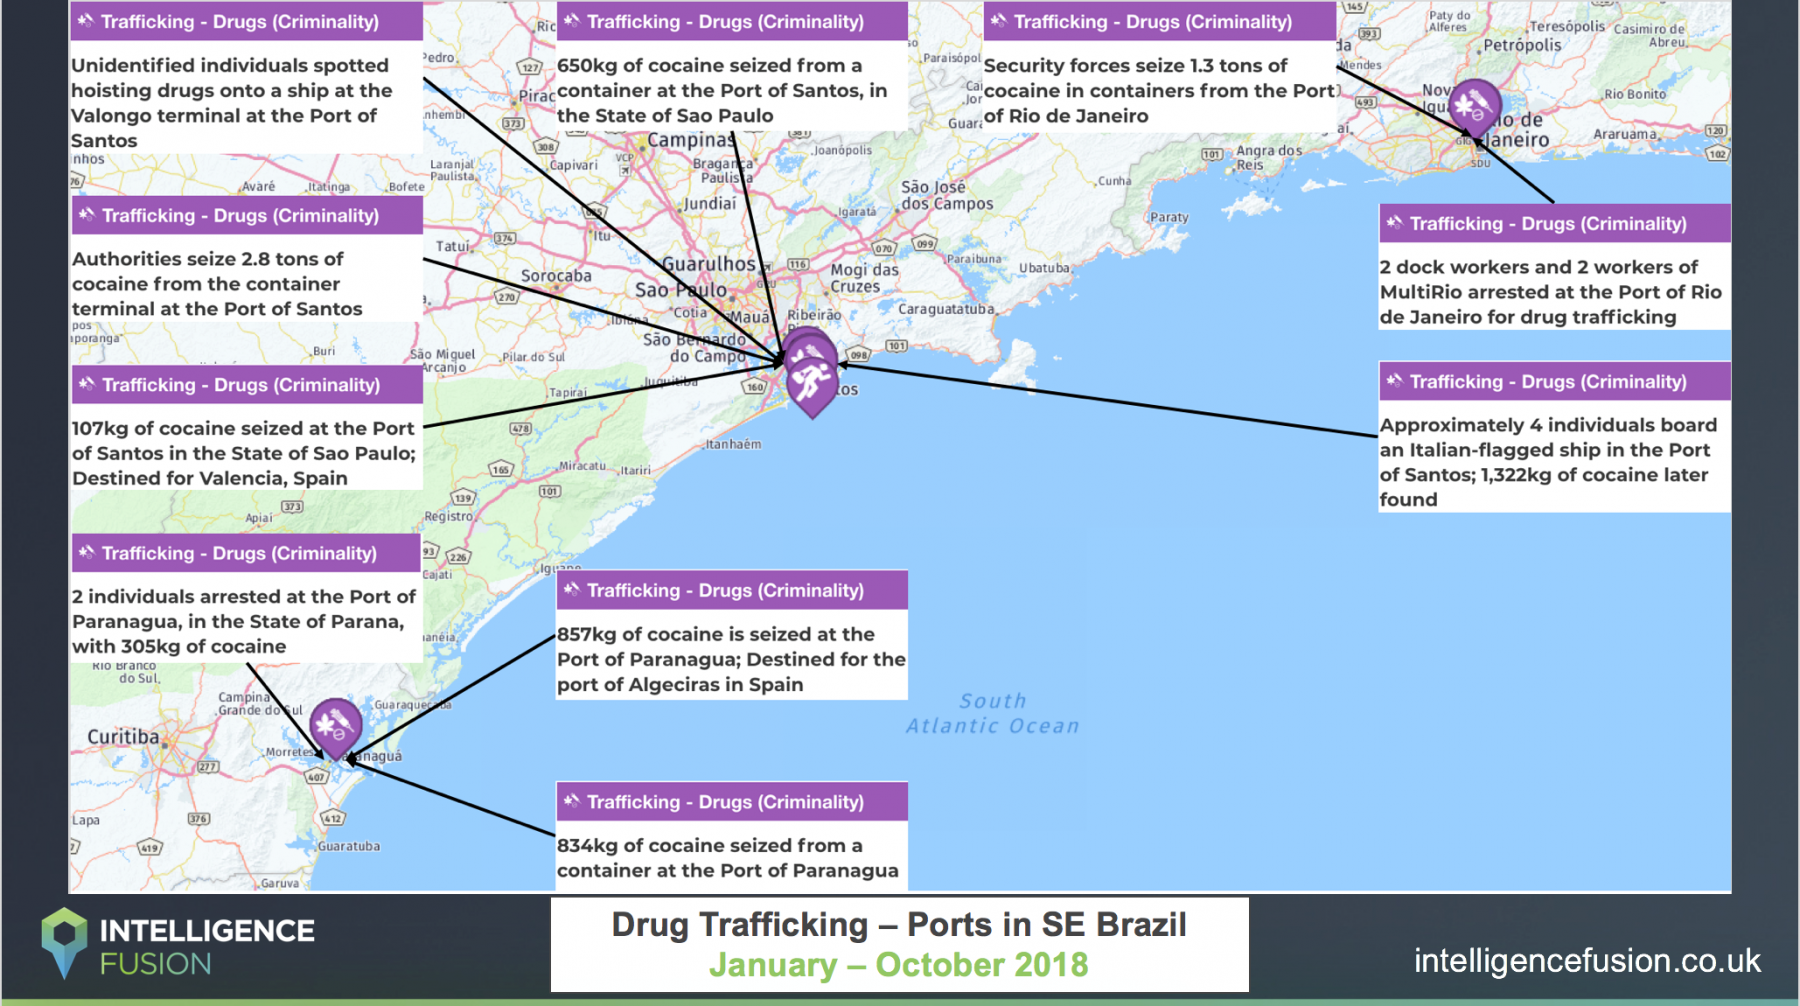 Drug trafficking incidents that affect South East ports in Brazil that have occurred during 2018.